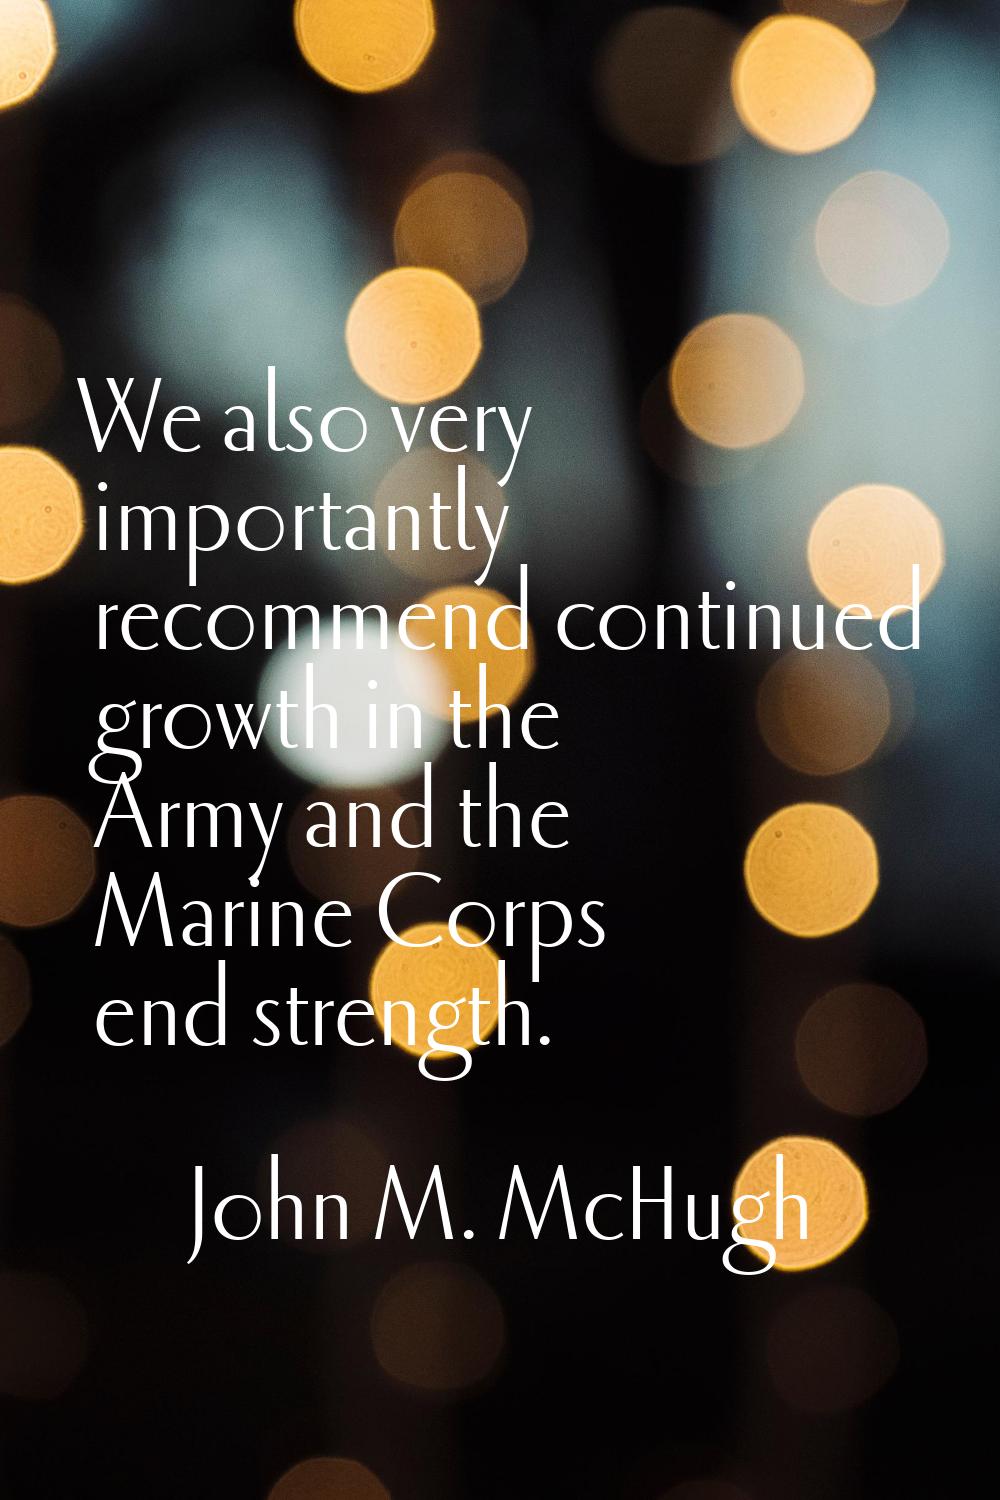 We also very importantly recommend continued growth in the Army and the Marine Corps end strength.